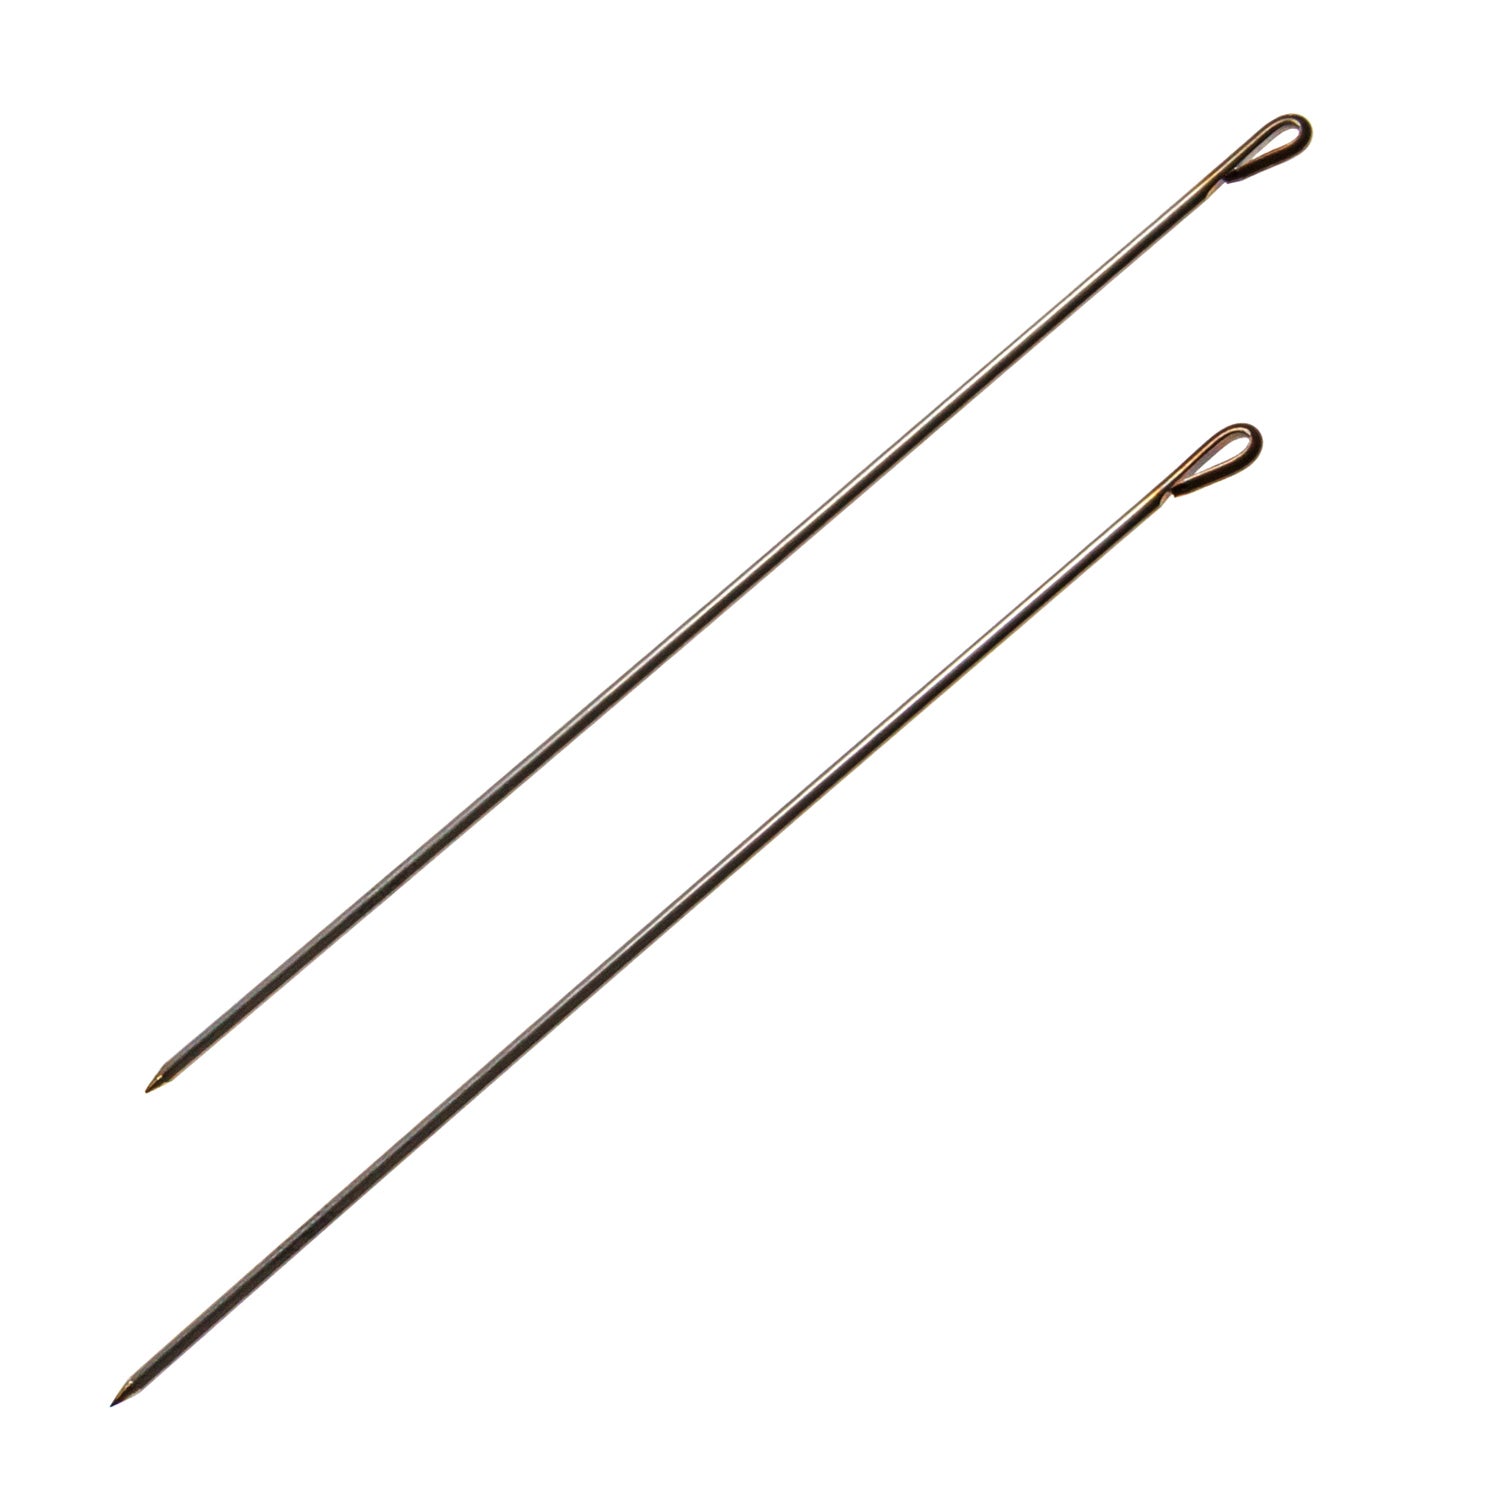 Rite Angler Sewing Needle 72240